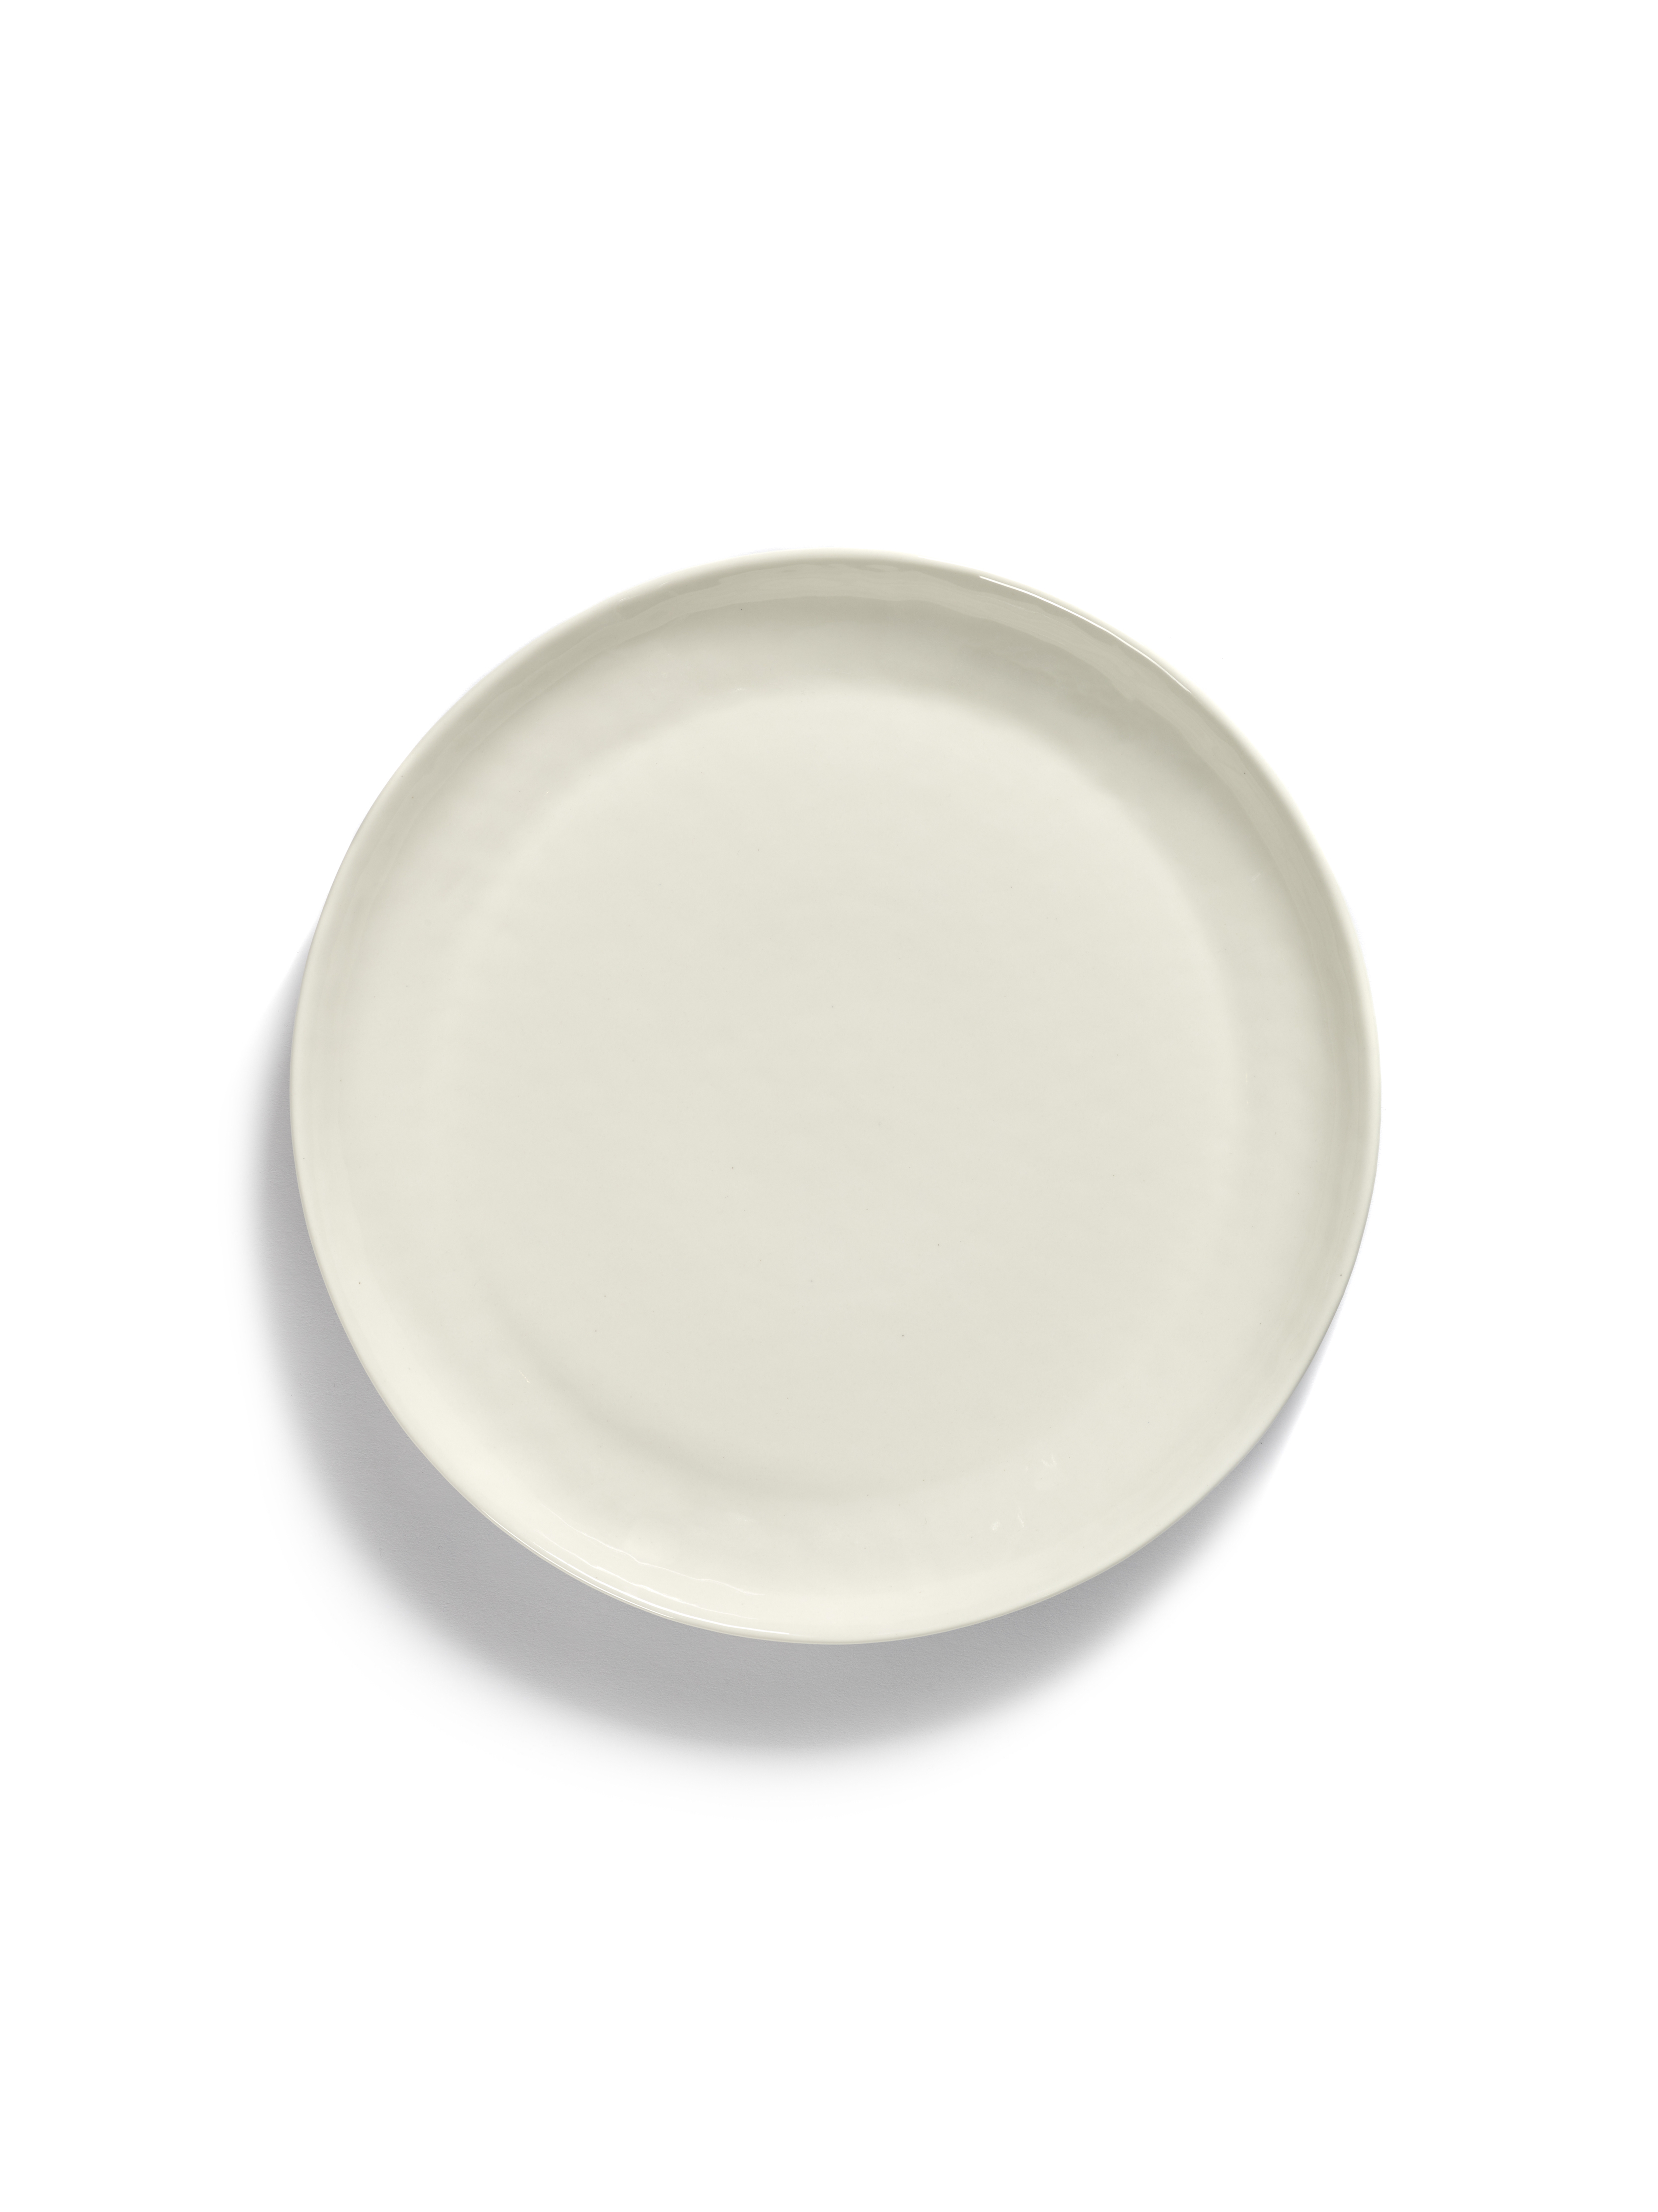 Serax Ottolenghi Feast Serving Plate in White